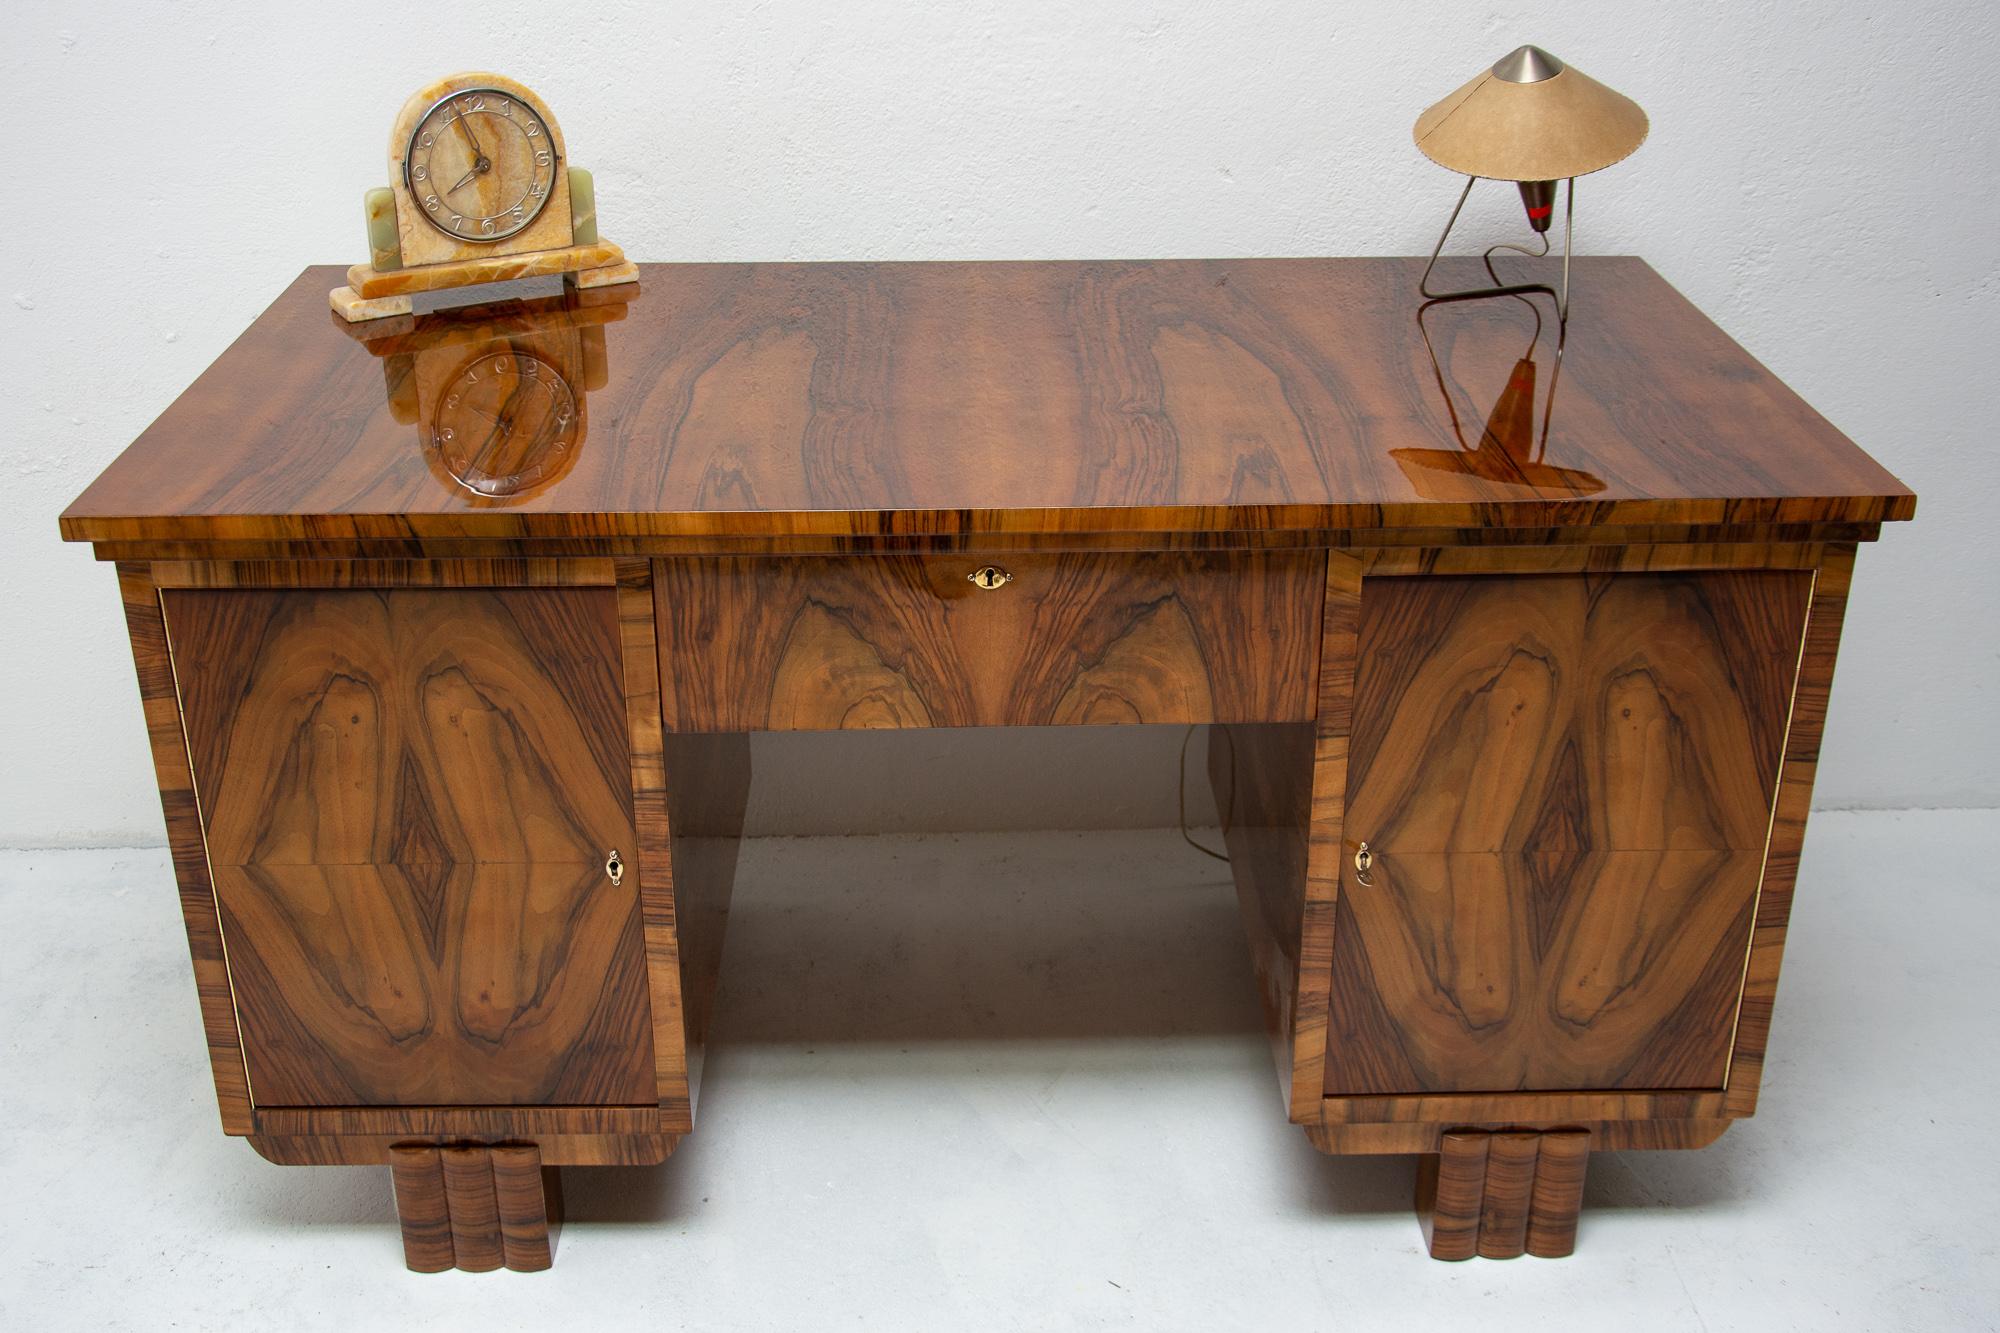 Massive Art Deco writing desk, made in the 1930s in Bohemia. It features a rectangular legs and walnut veneer inlaid. It includes five drawers and one shelf. The desk is in excellent condition due to complete professional renovation.